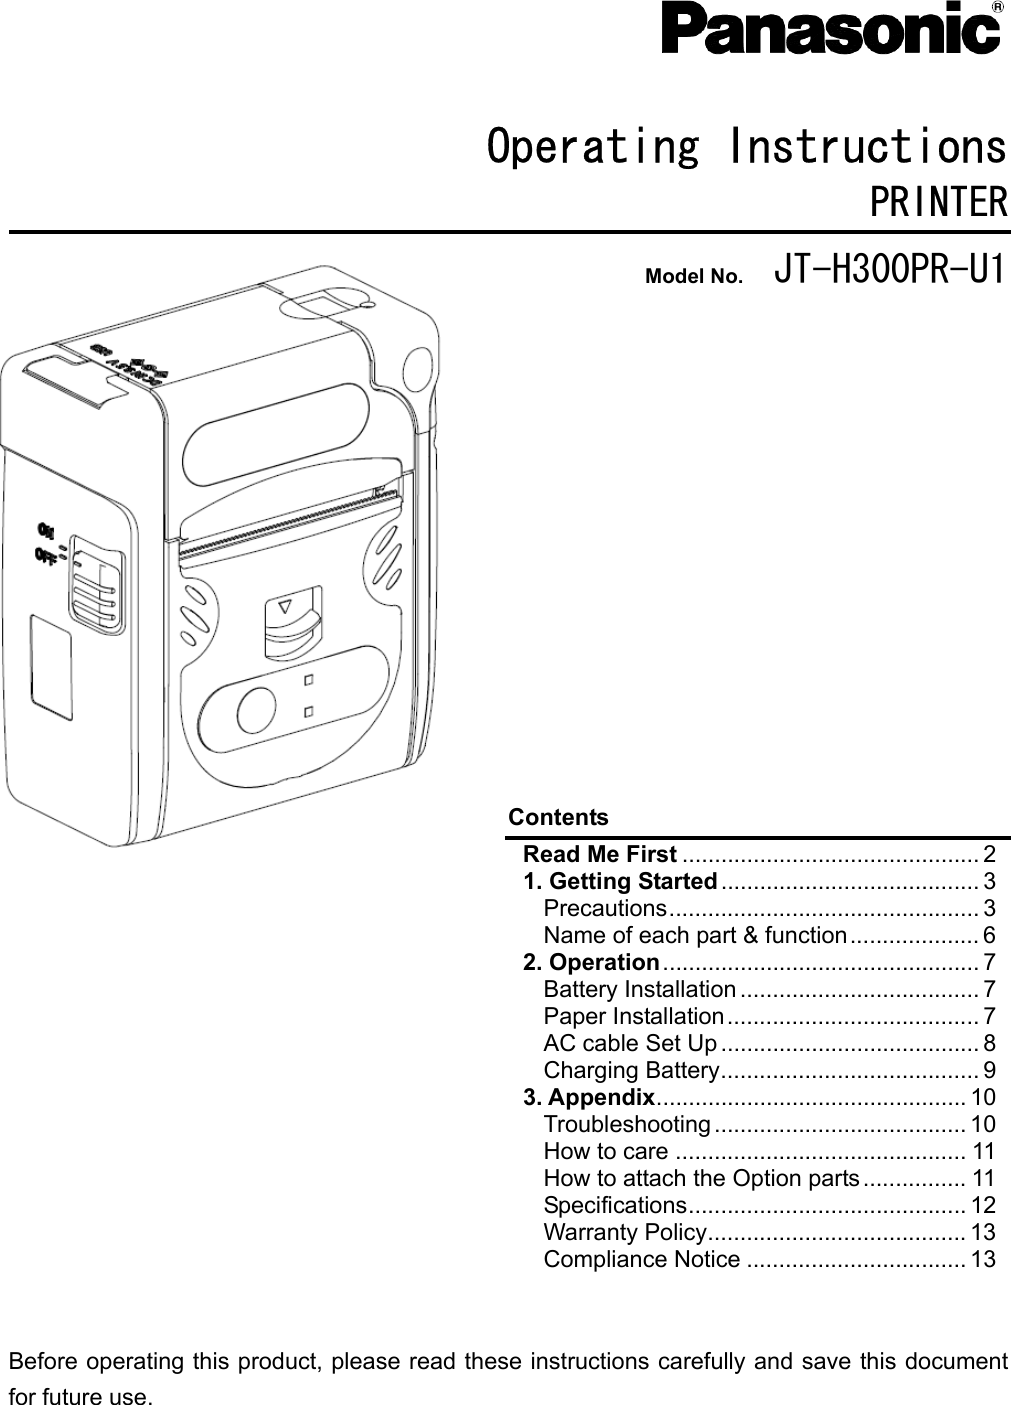     Operating Instructions PRINTER Model No.  JT-H300PR-U1               Contents Precautions................................................ 3 Name of each part &amp; function.................... 6 Battery Installation ..................................... 7 Paper Installation....................................... 7 AC cable Set Up ........................................ 8 Charging Battery........................................ 9 Troubleshooting ....................................... 10 How to care ............................................. 11 How to attach the Option parts................ 11 Specifications........................................... 12 Warranty Policy........................................ 13 Compliance Notice .................................. 13   Before operating this product, please read these instructions carefully and save this document for future use. Read Me First .............................................. 2 1. Getting Started ........................................ 3 2. Operation................................................. 73. Appendix................................................ 10